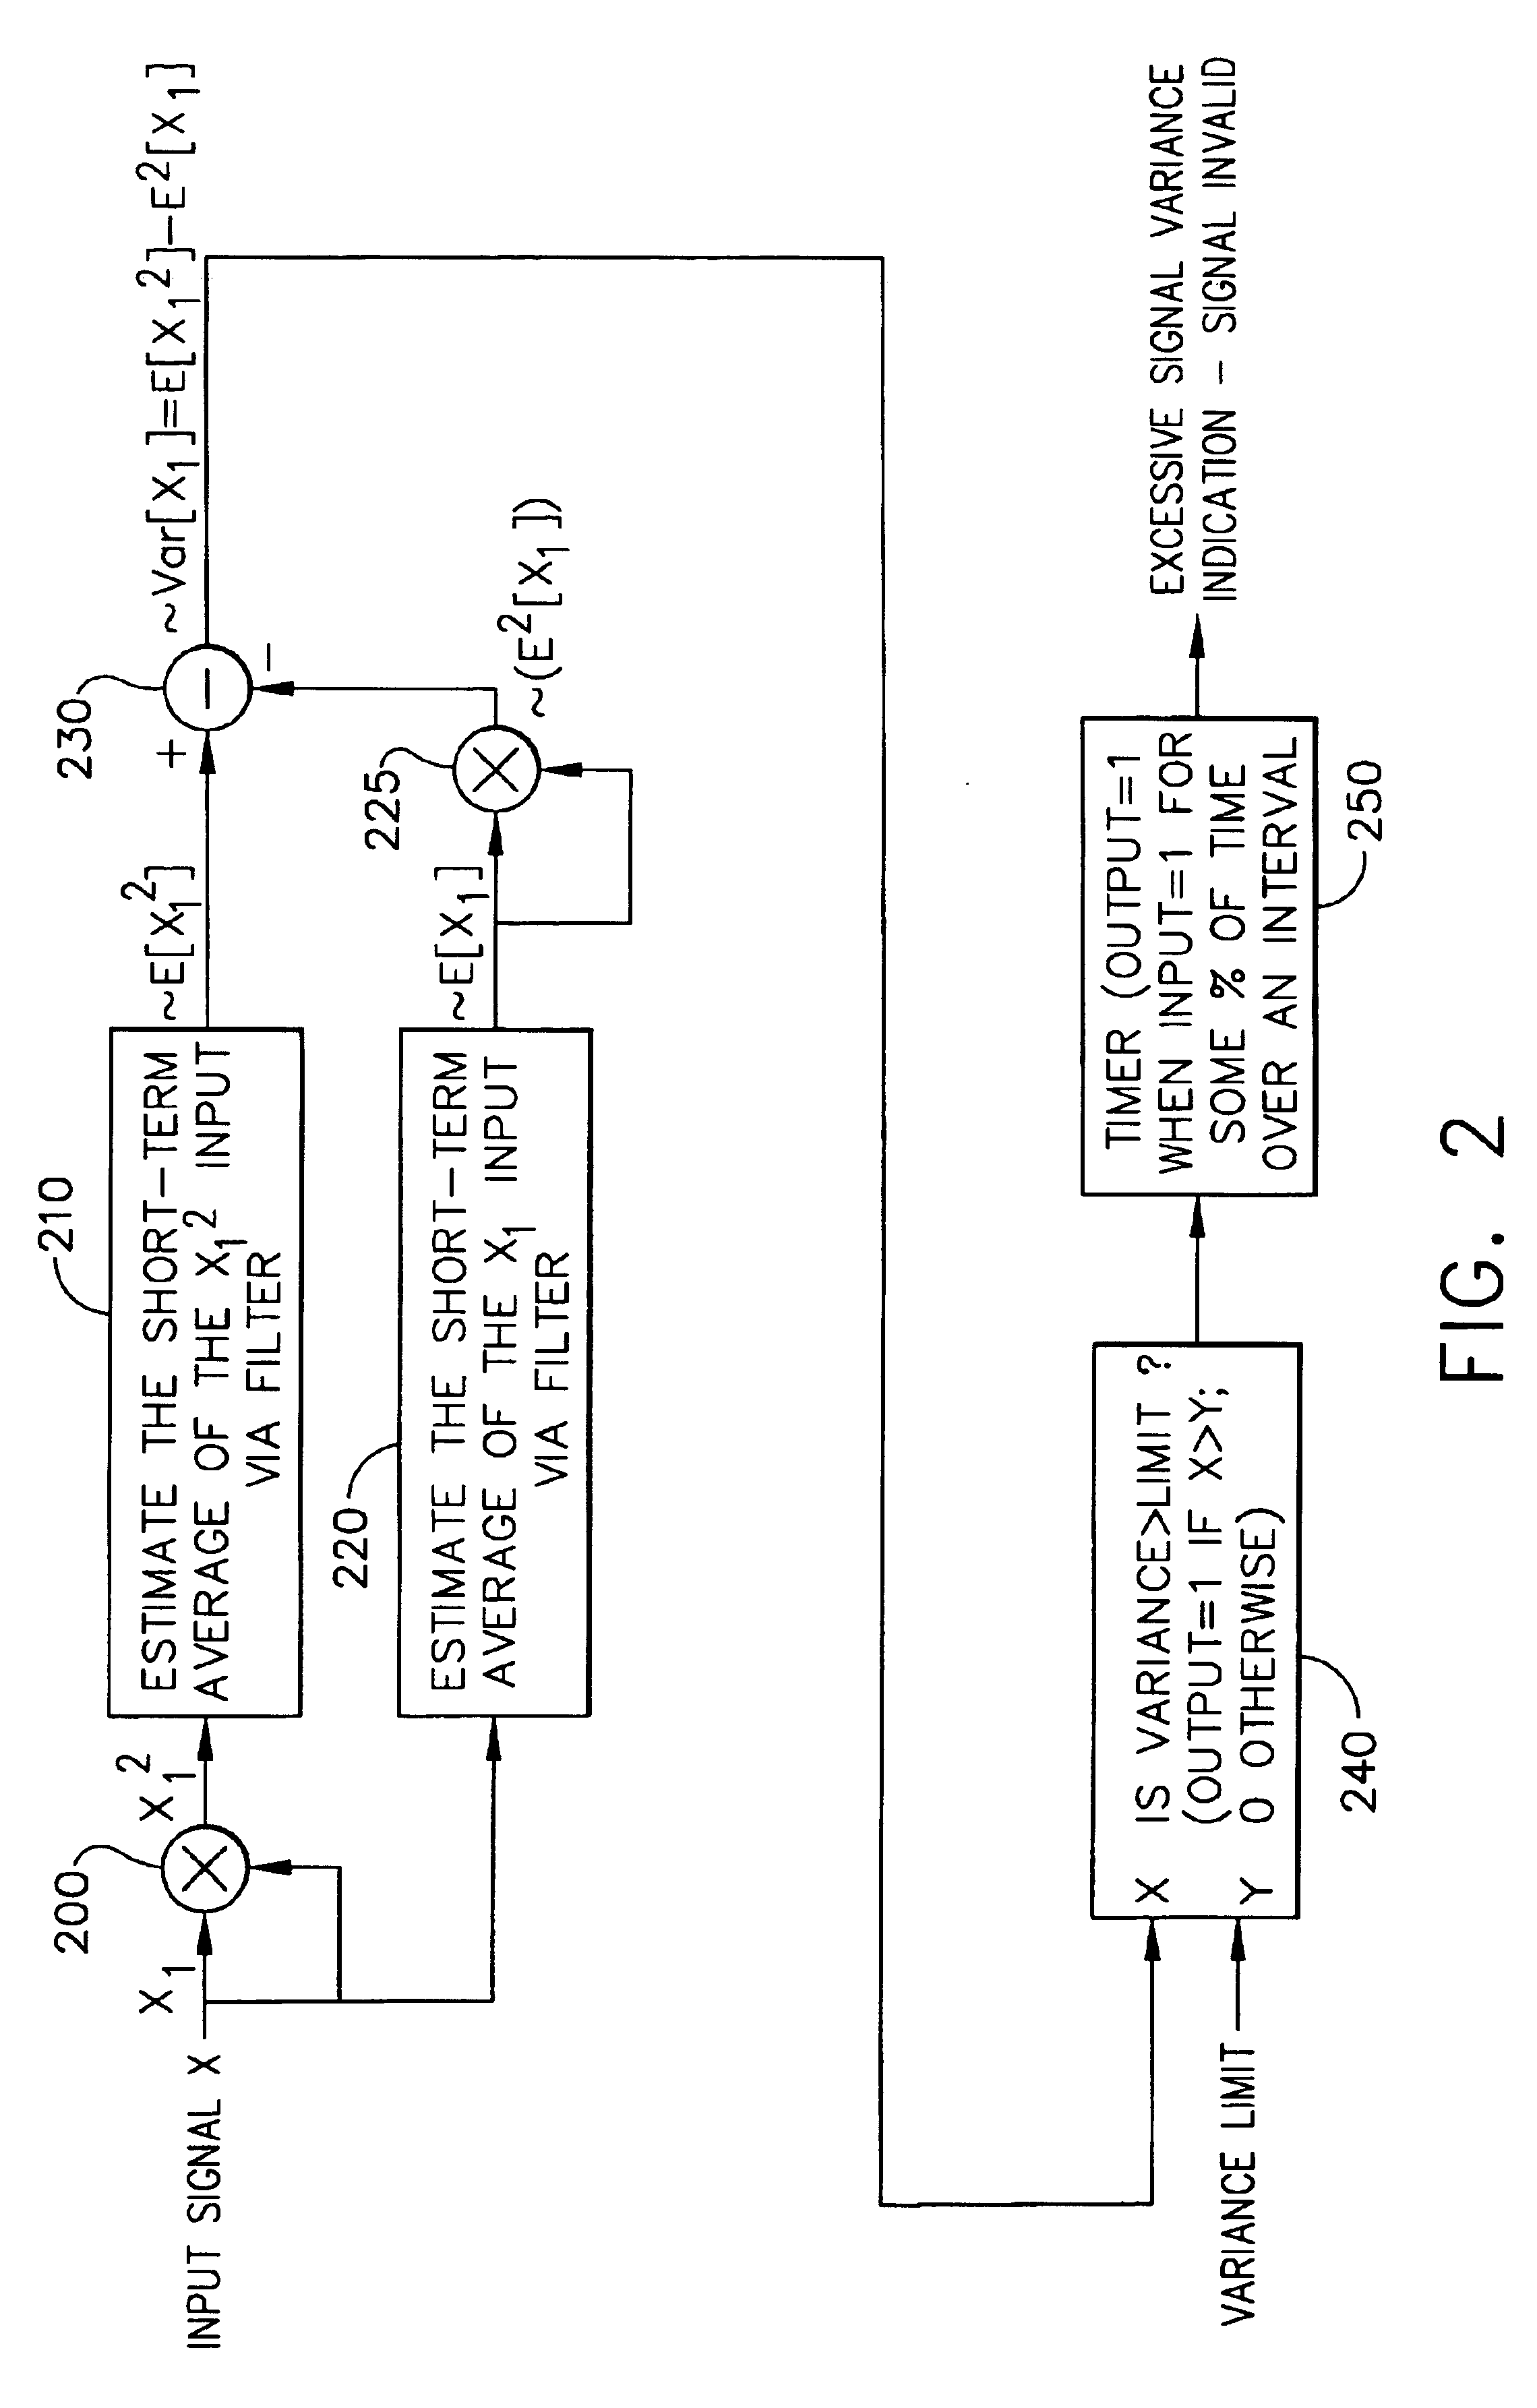 Speed signal variance detection fault system and method